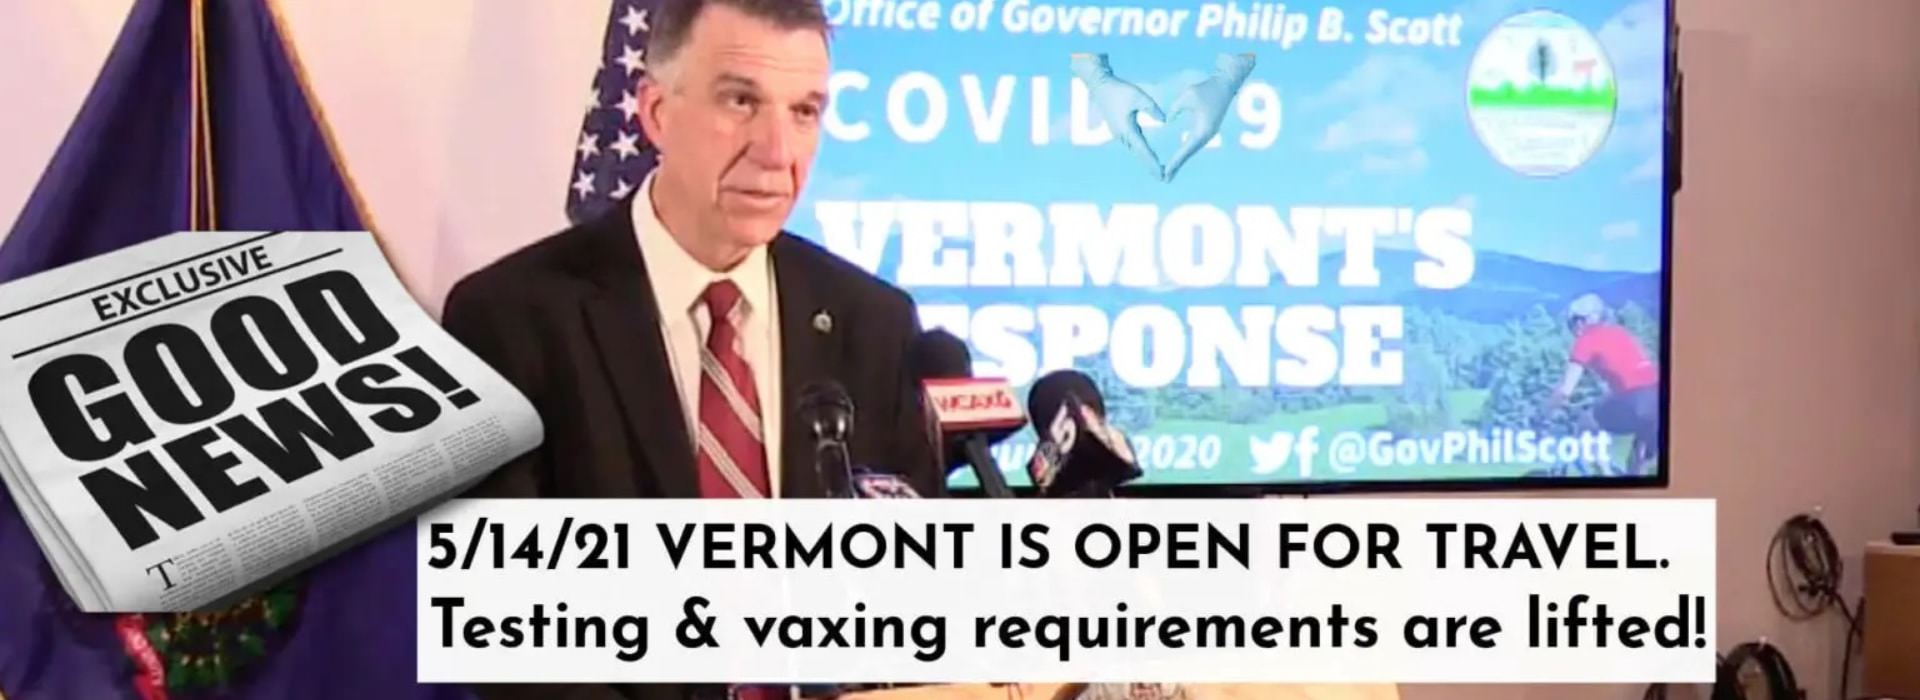 Gov Scott speaking about Covid requirements|Rabbit Hill Inn at dusk with purple sky above|check availability button|Vermont Governor Phil Scott standing at a podium during press conference|Governor Phil Scott talking about lifting restrictions